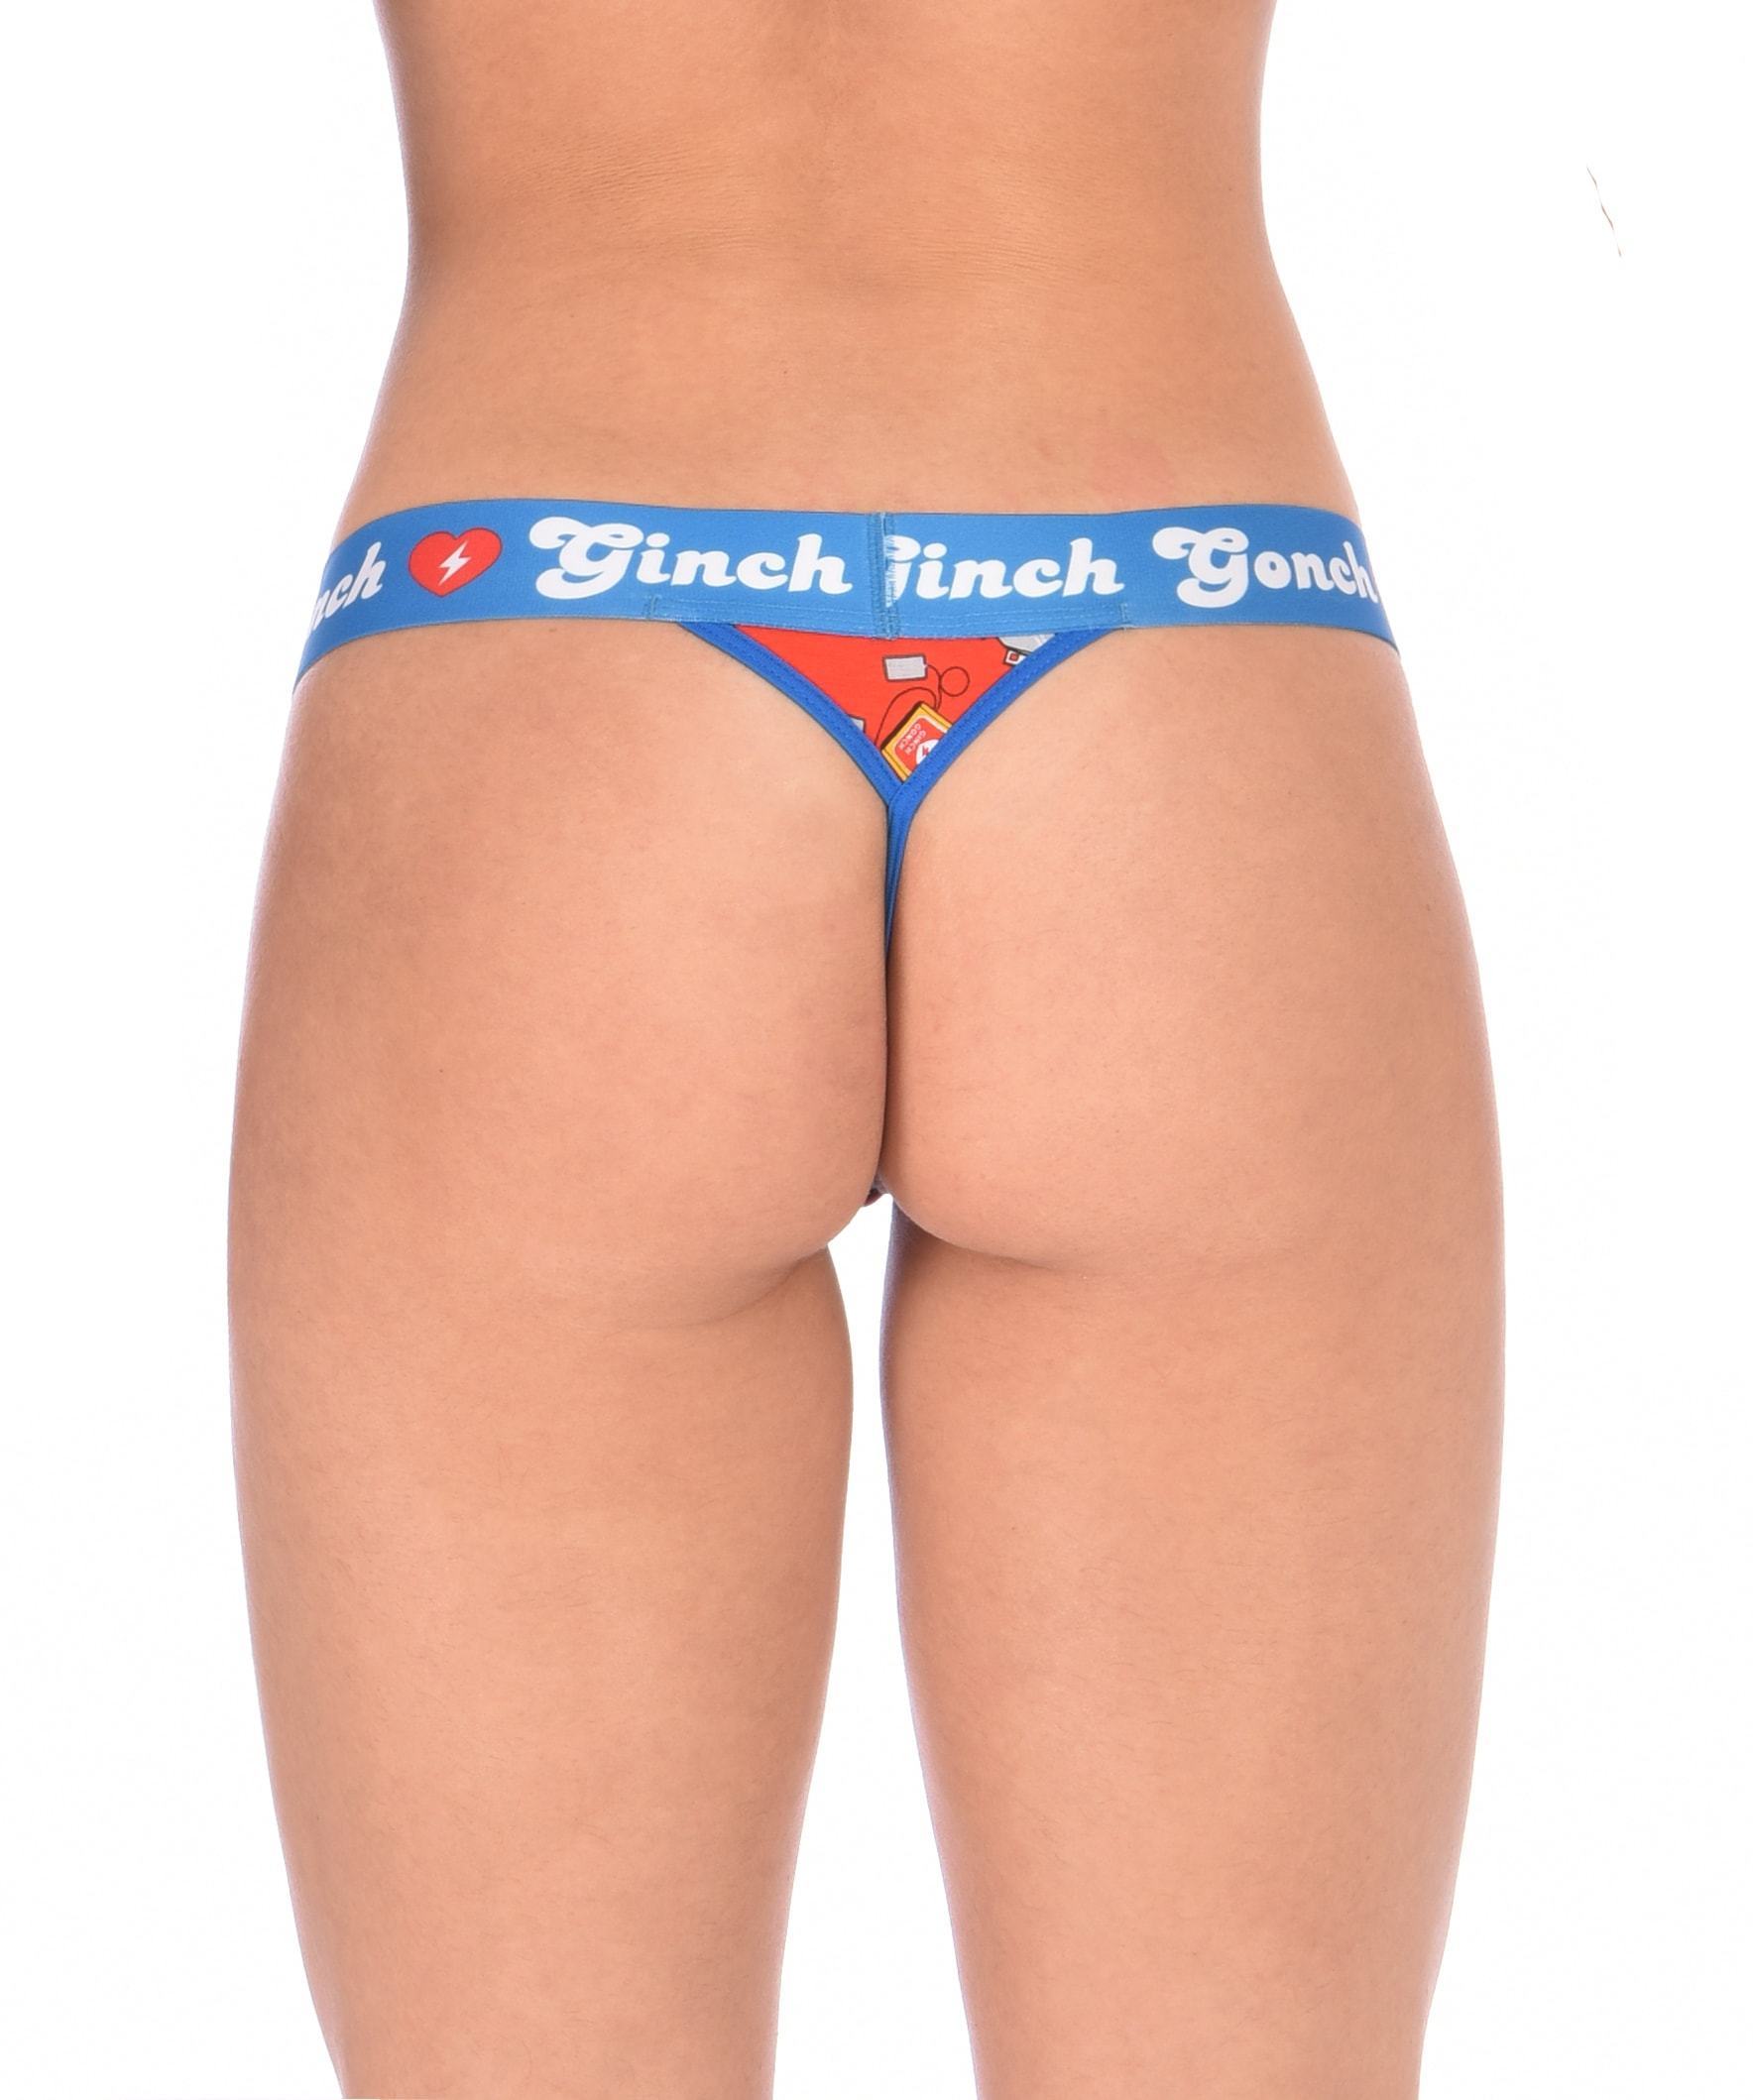 Ginch Gonch GG EMT thong women's ambulance print with medical symbol and equipment on red background with blue trim and printed waistband back